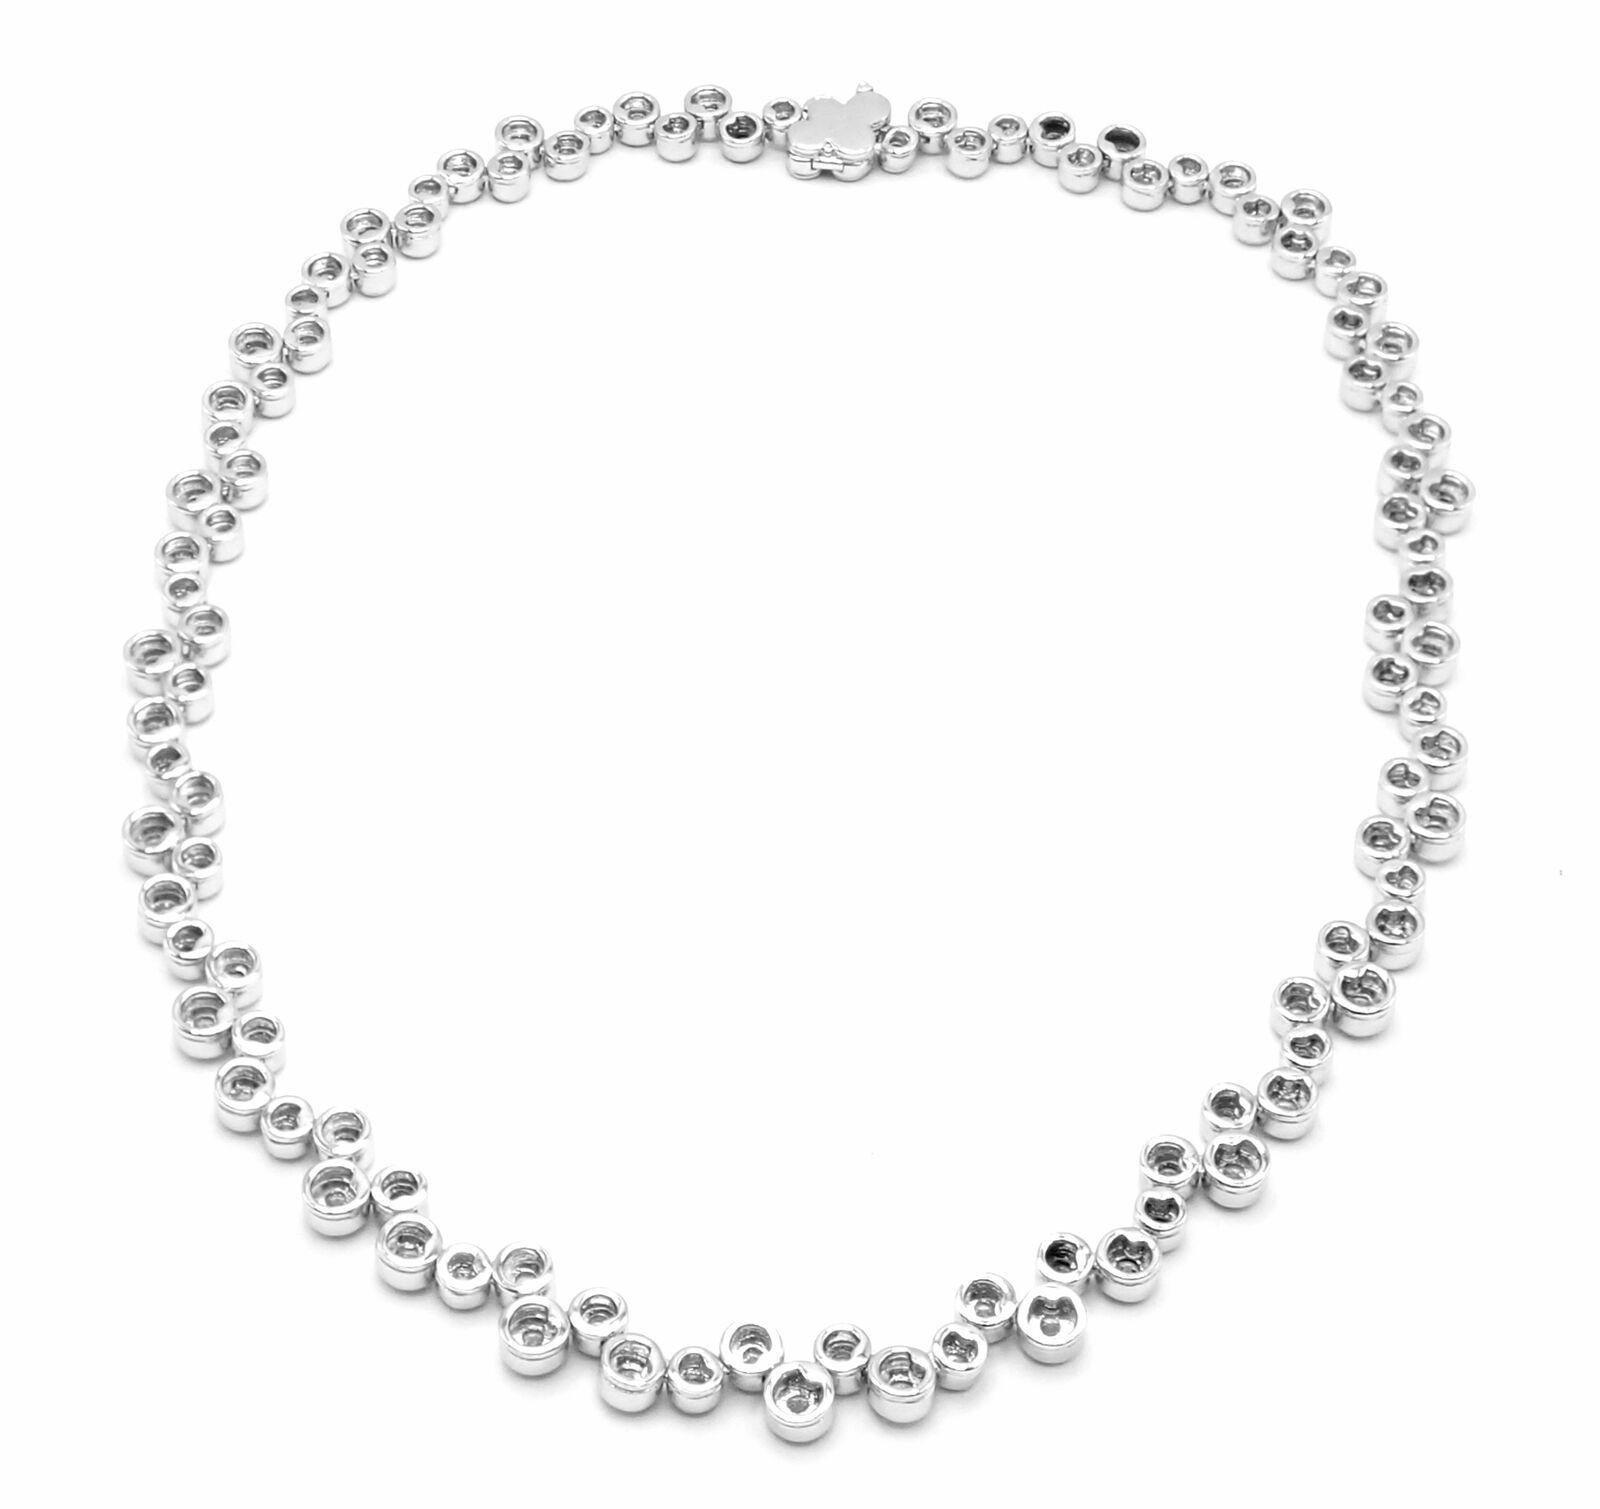 Tiffany & Co Bubbles 10ct Diamond Platinum Choker Necklace In Excellent Condition For Sale In Holland, PA